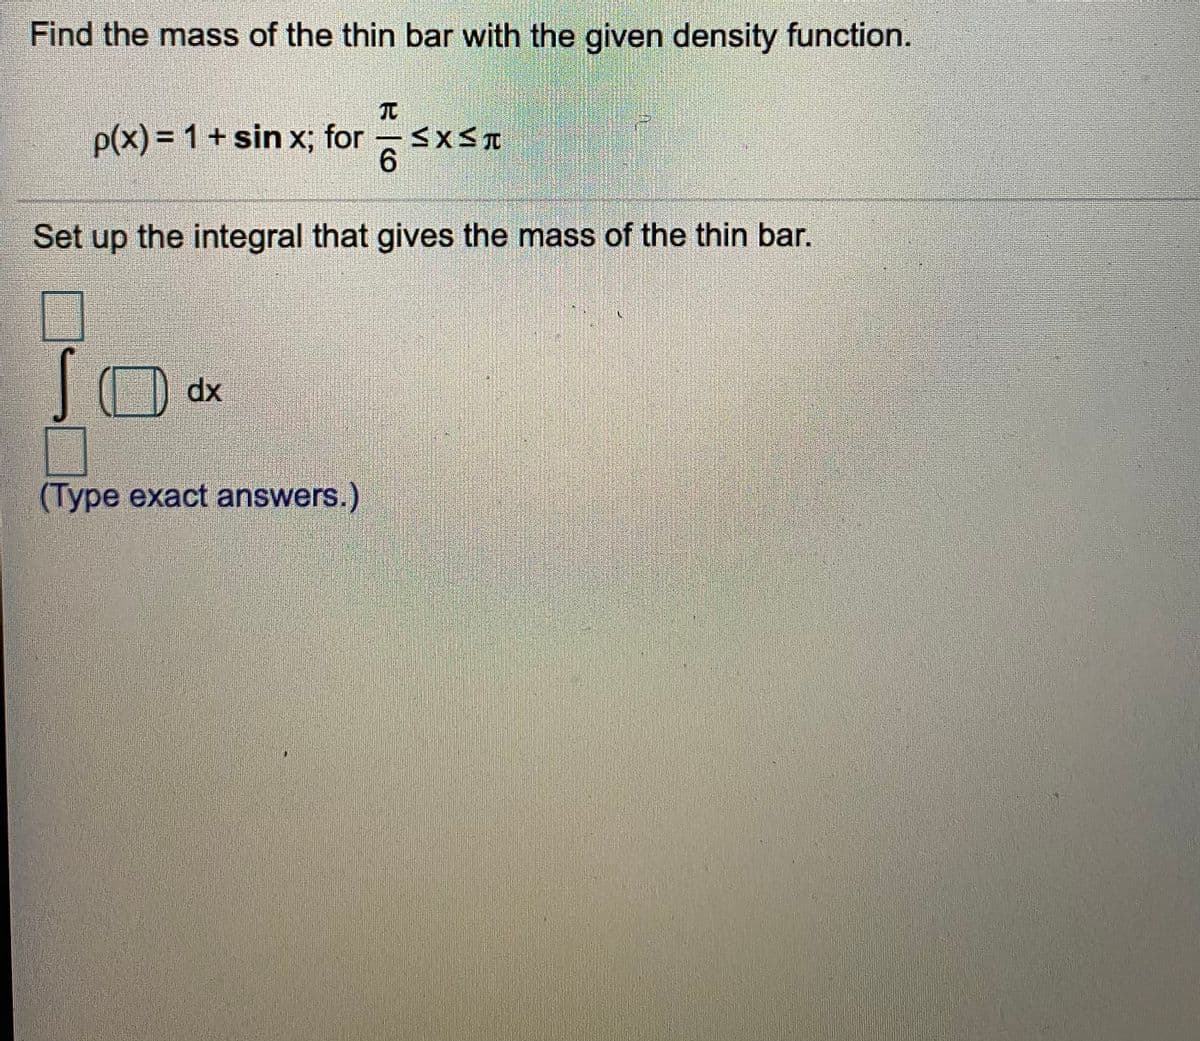 Find the mass of the thin bar with the given density function.
p(x)% = 1+ sin x; for SXST
6.
Set up the integral that gives the mass of the thin bar.
dx
(Type exact answers.)
